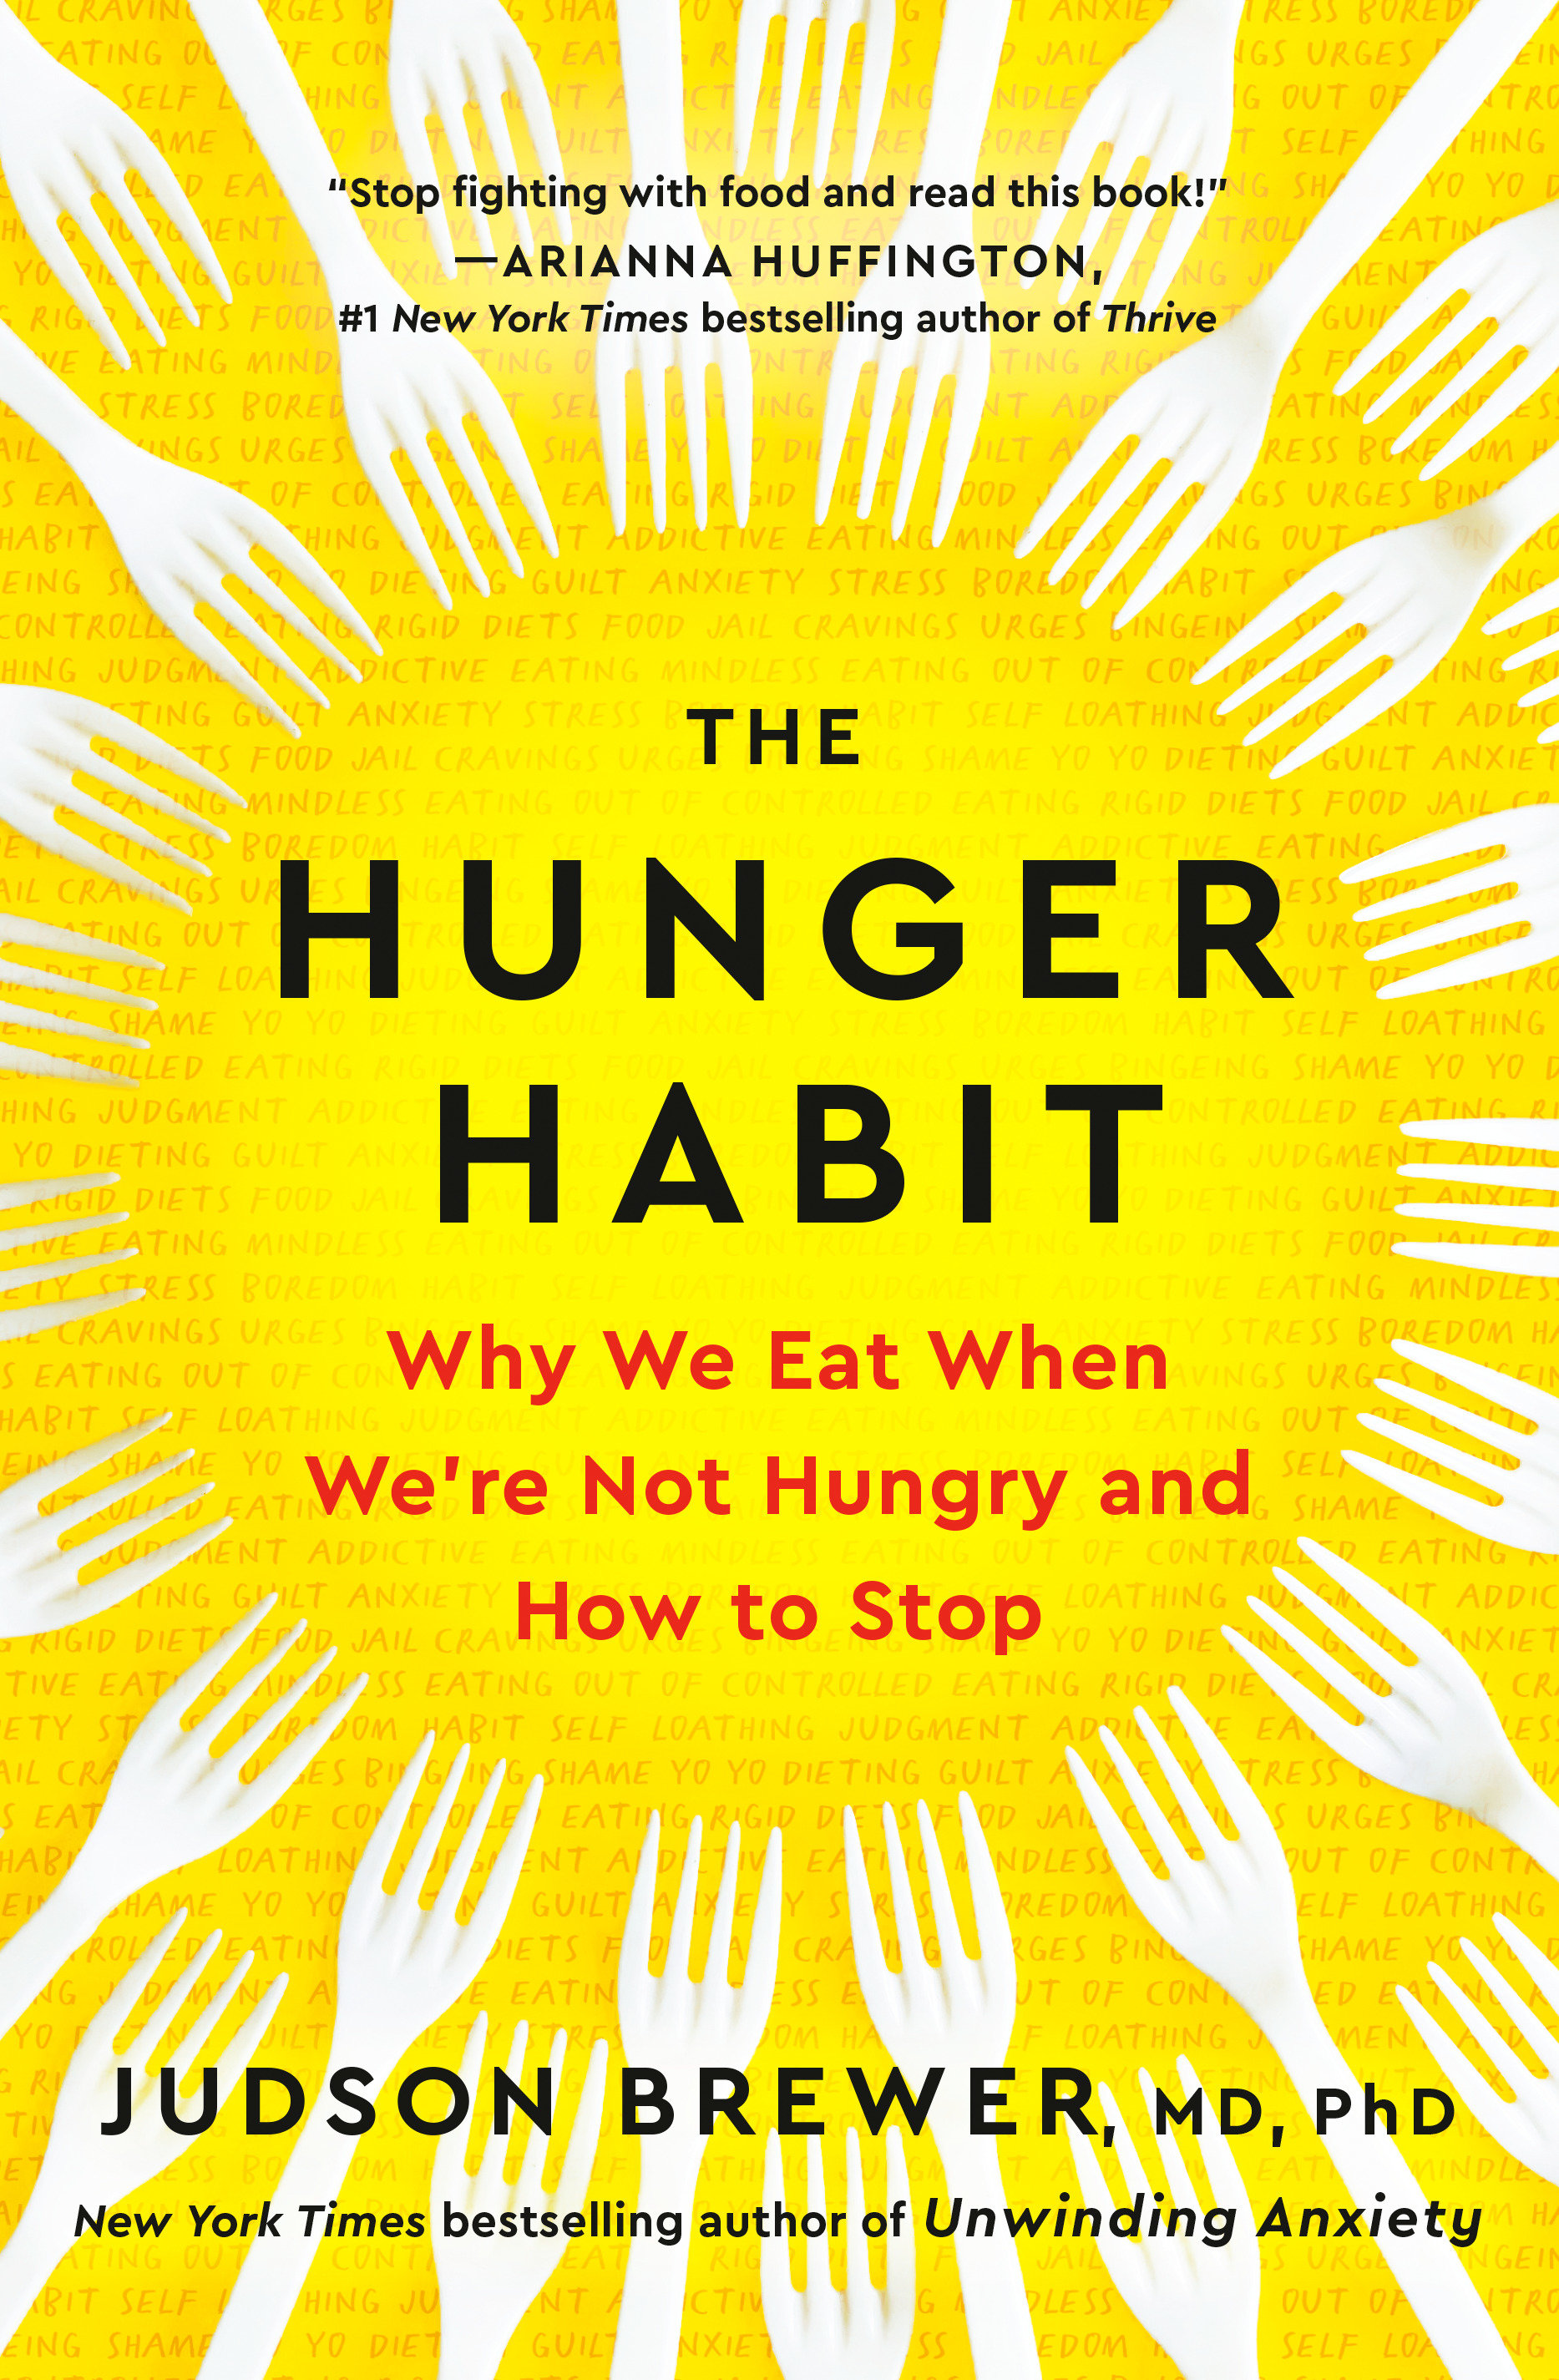 Image de couverture de The Hunger Habit [electronic resource] : Why We Eat When We're Not Hungry and How to Stop